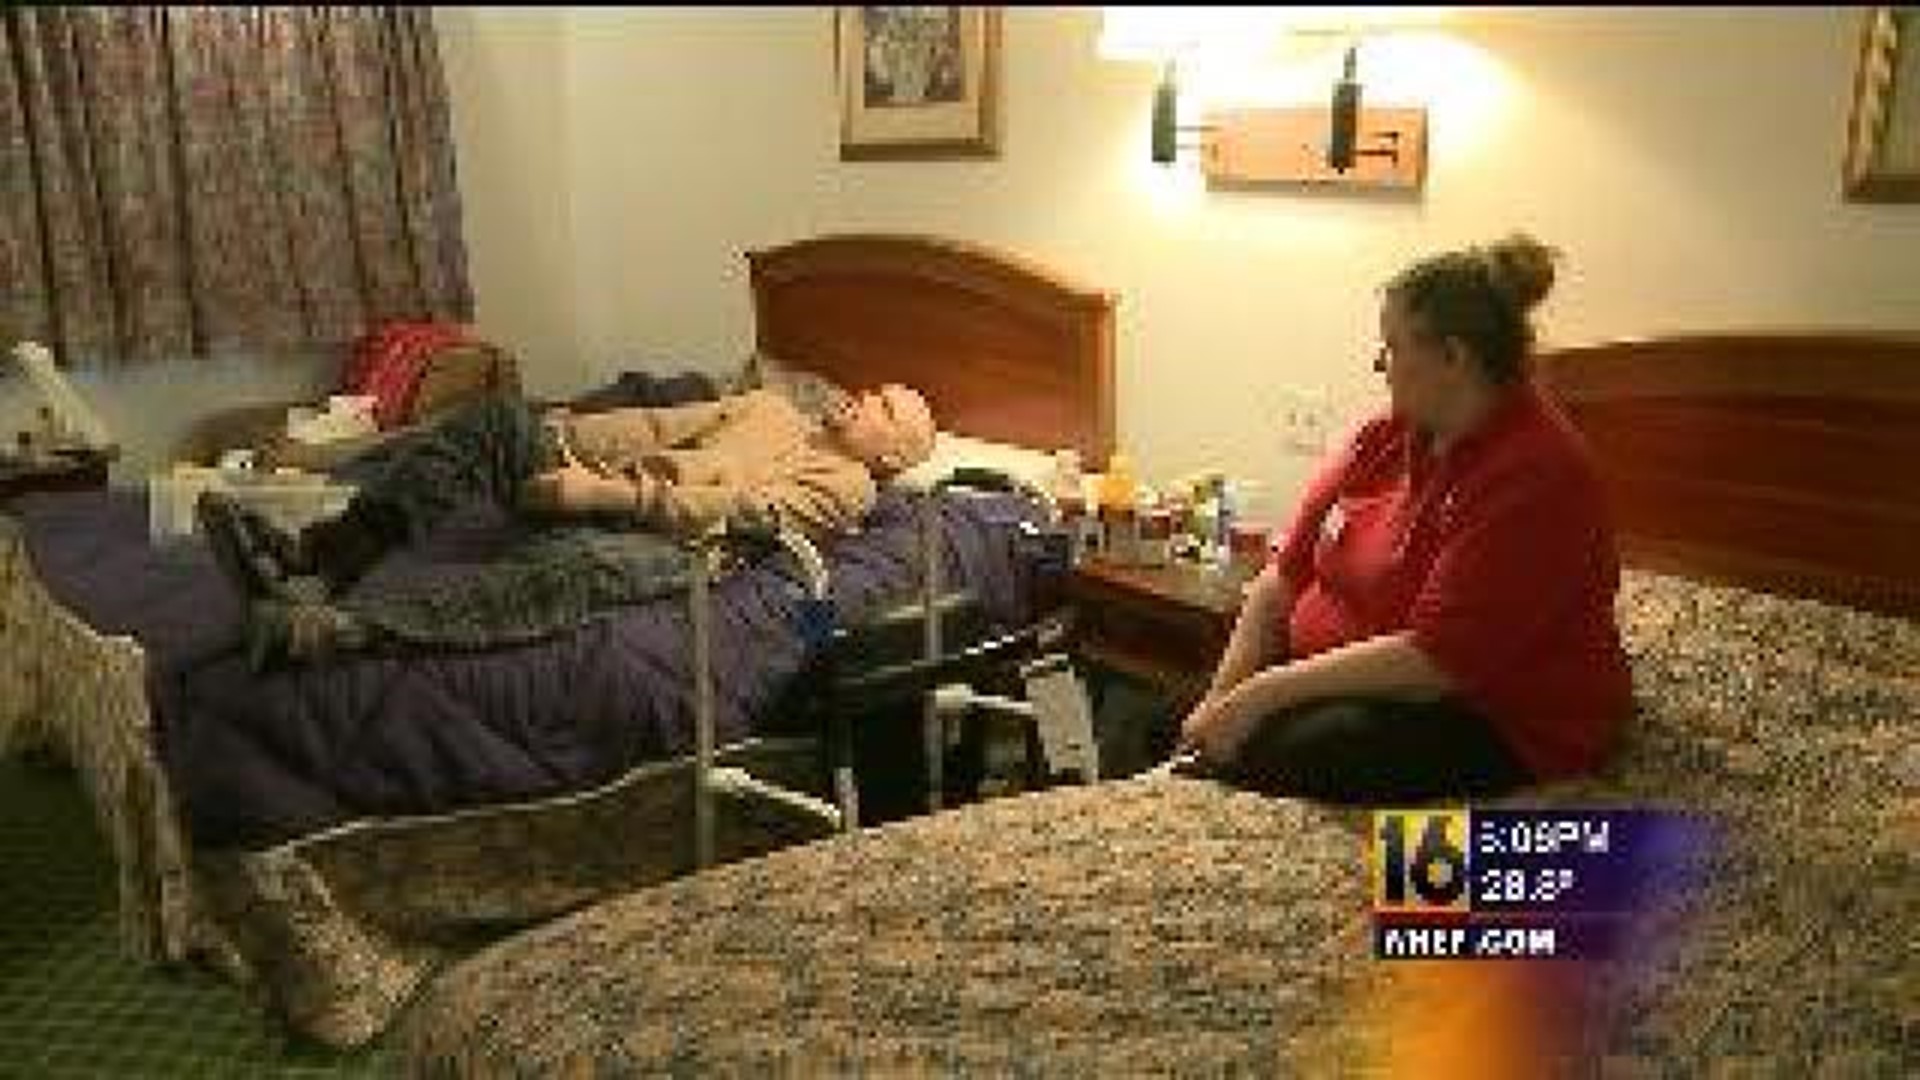 Fire Victims Ask Community for Help